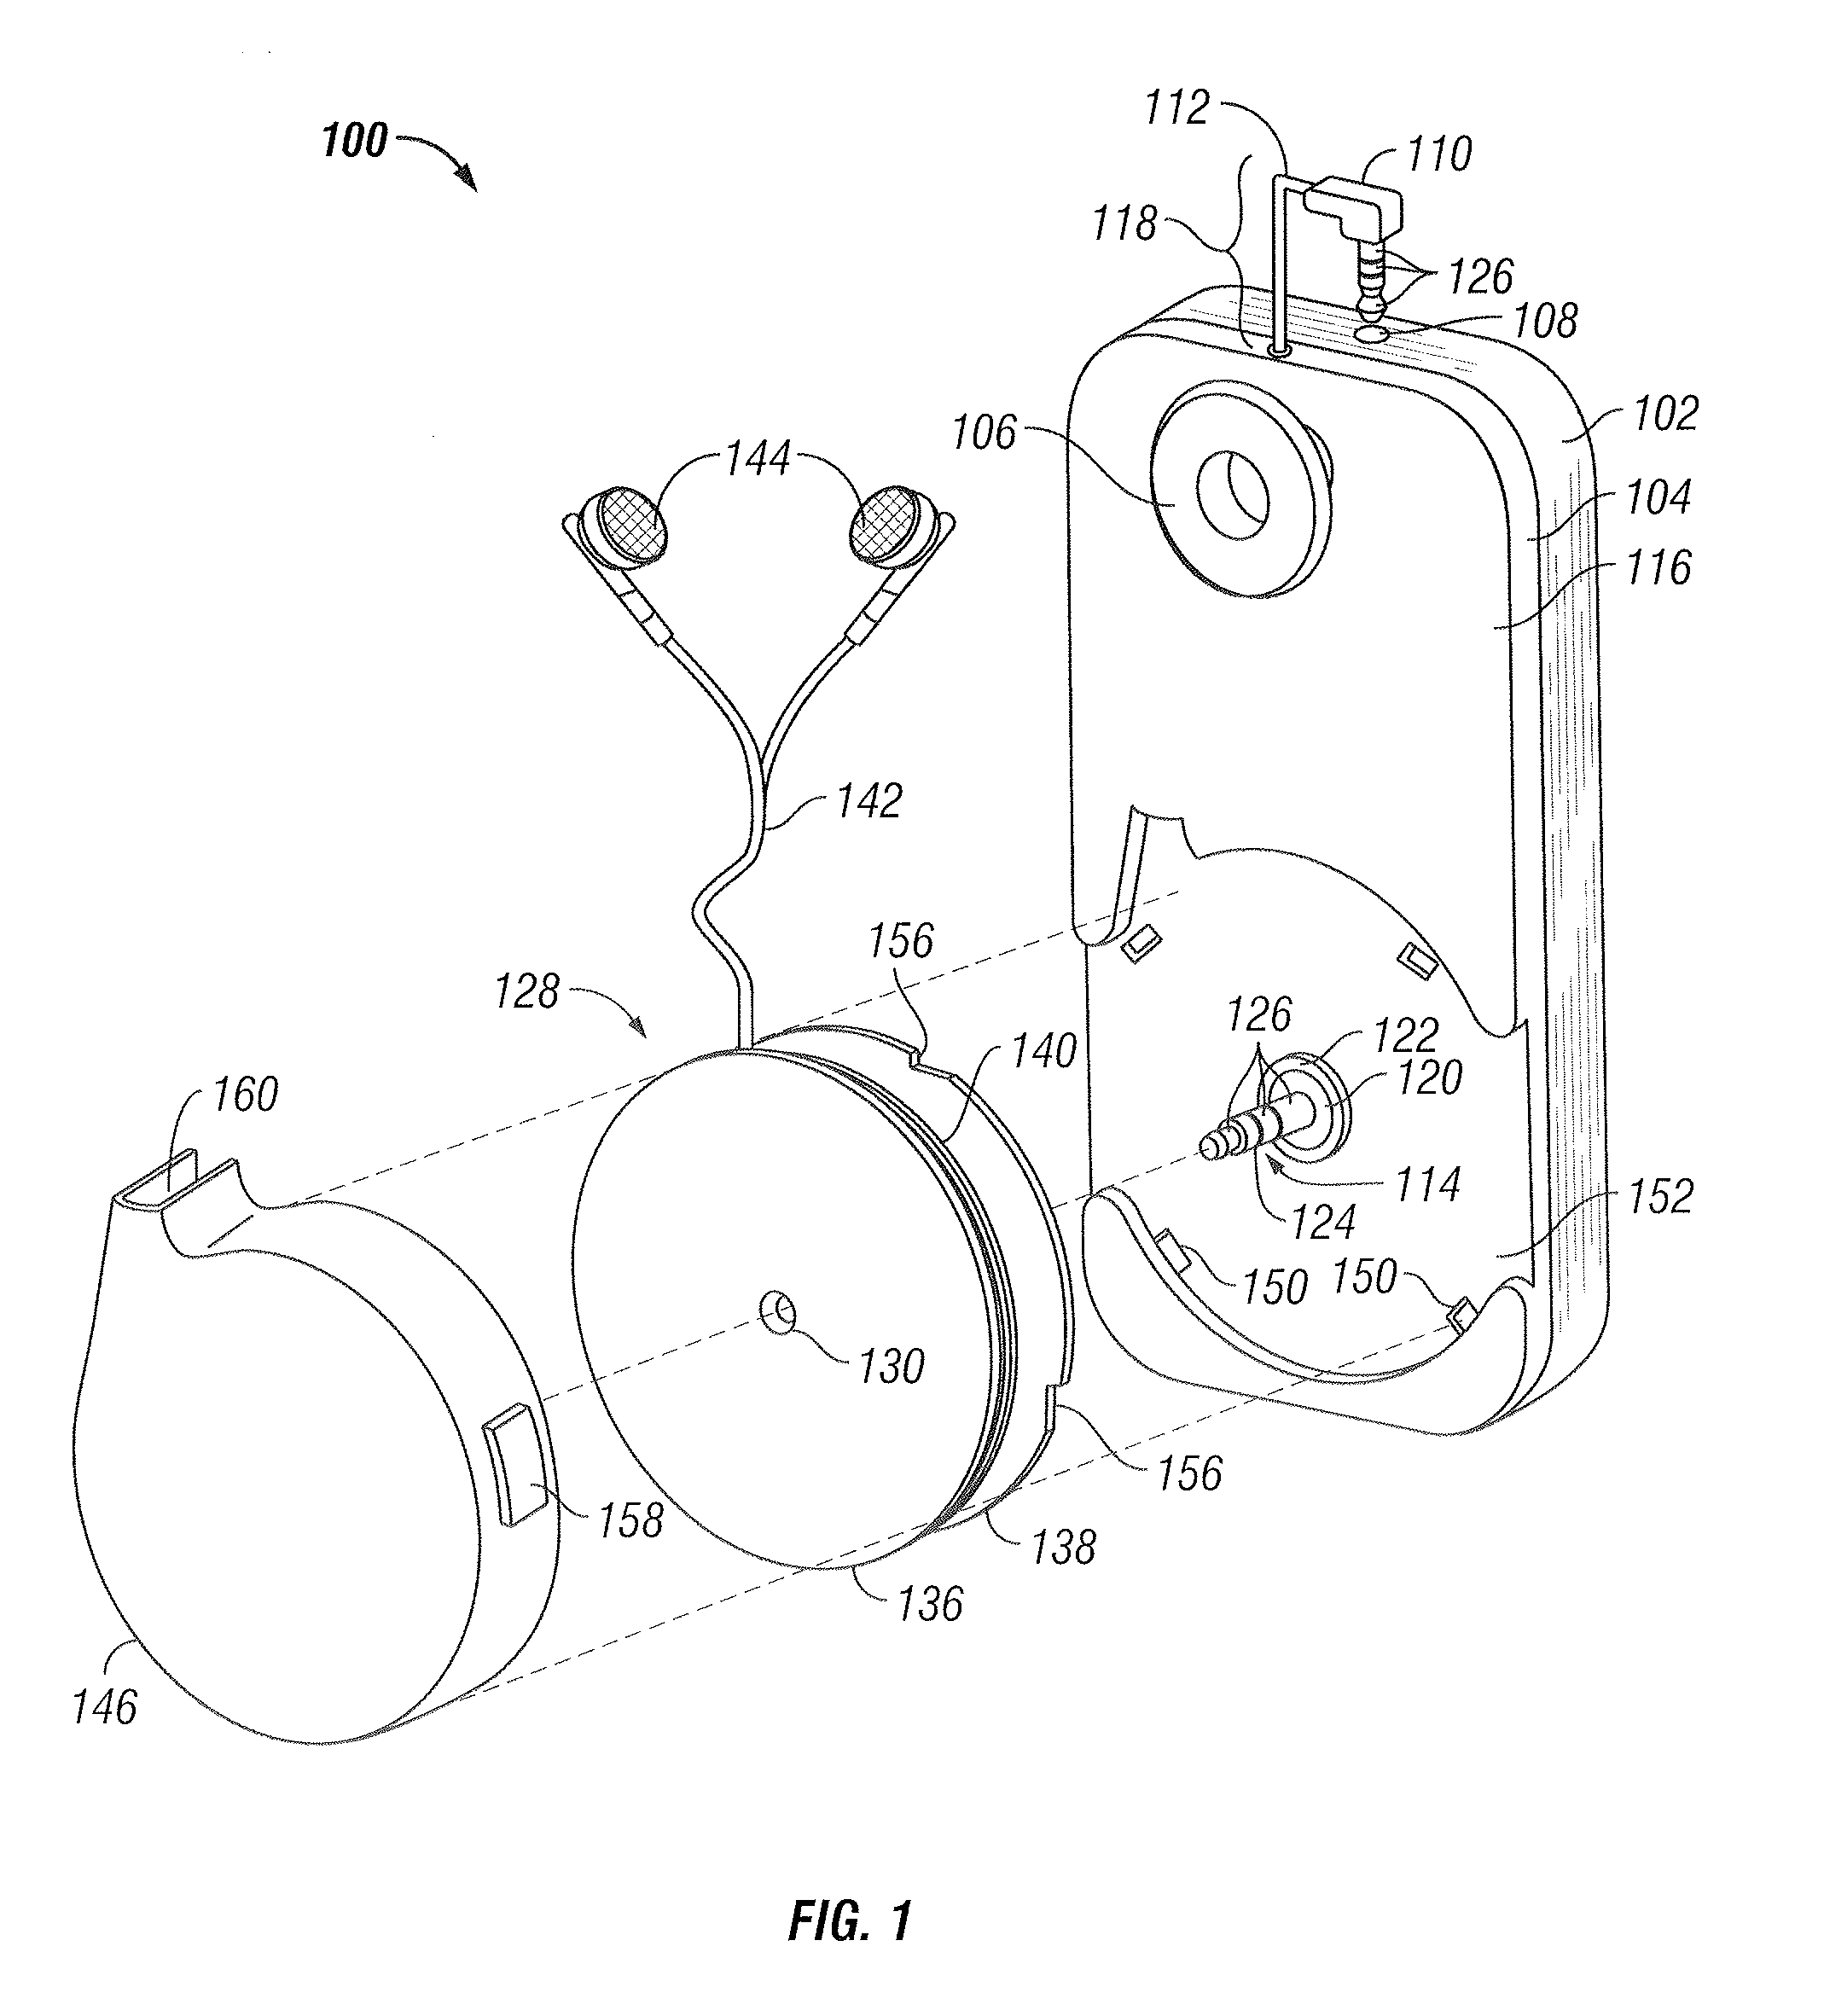 Electronic device carrying system with retractable transducer assembly